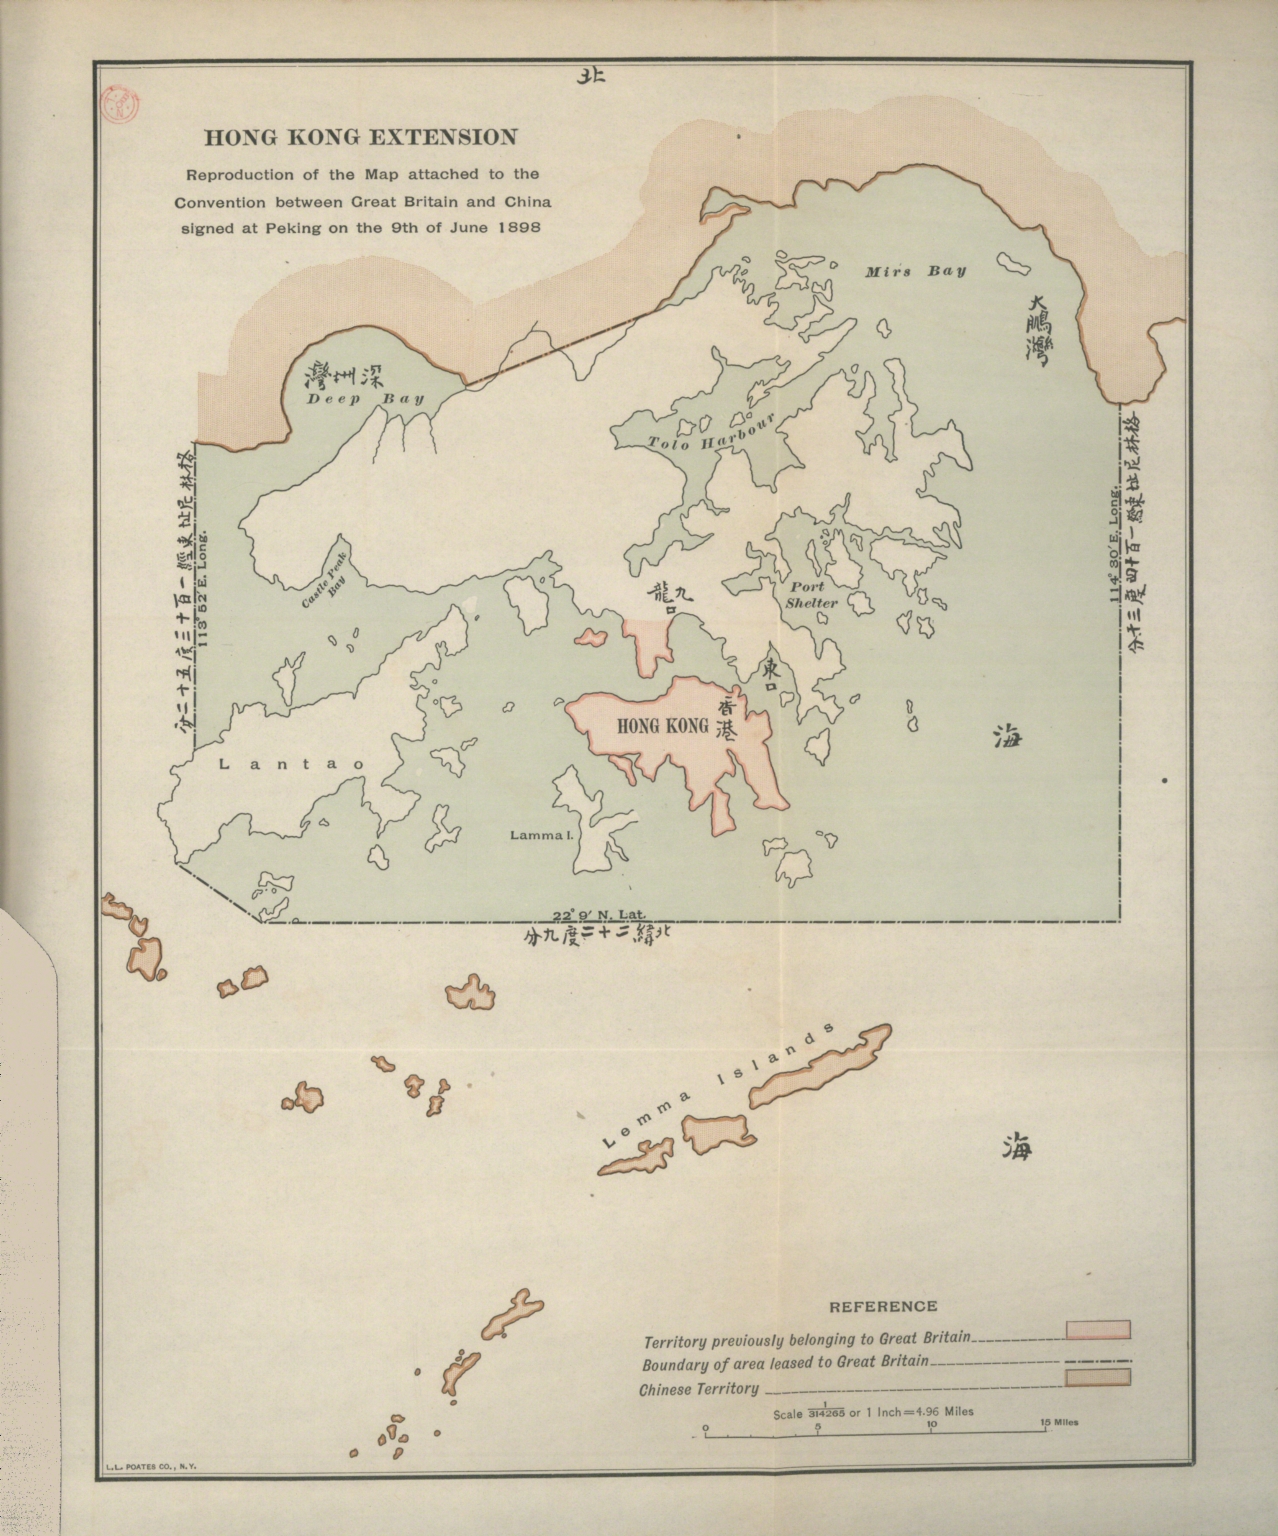 Hong Kong extension : reproduction of the map attached to the Convention between Great Britain and China signed at Peking on the 9th of June 1898.